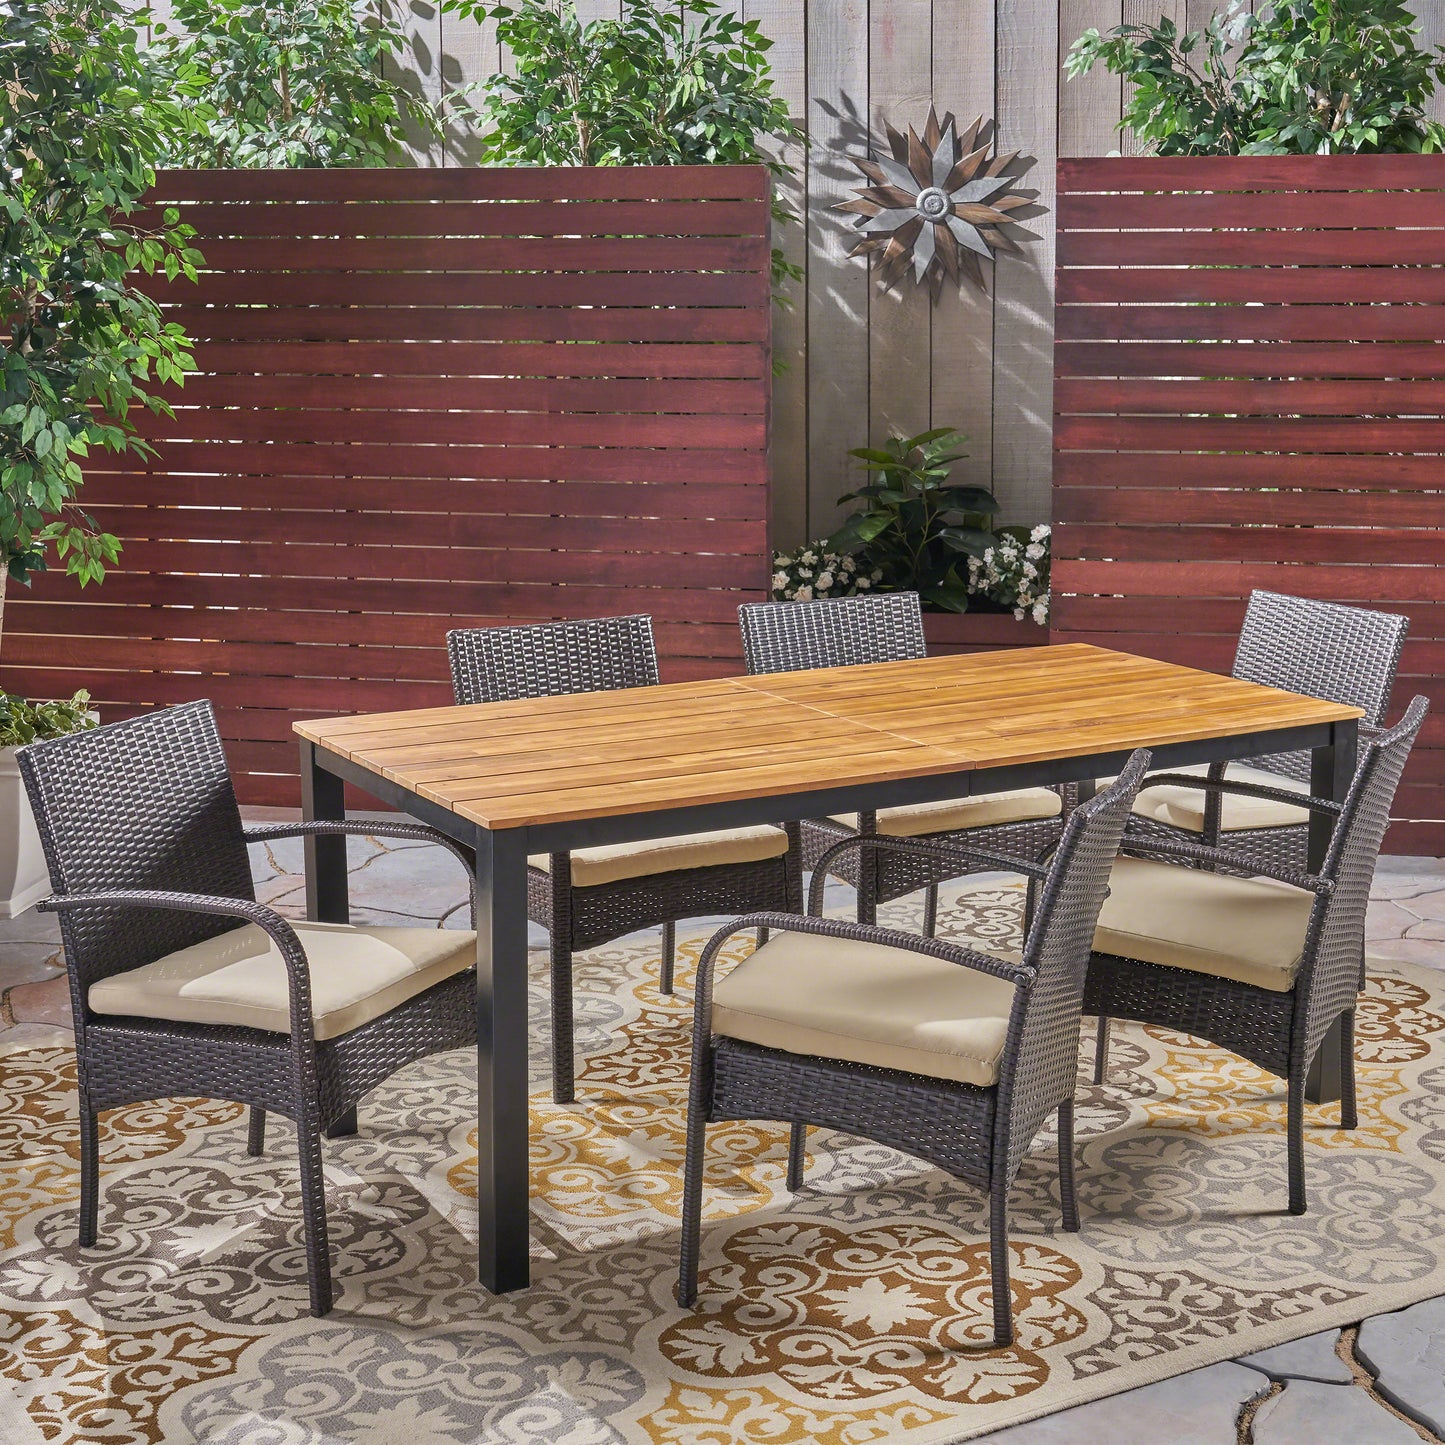 Nicole Outdoor 7 Piece Acacia Wood Dining Set with Wicker Chairs, Teak and Multi Brown and Cream